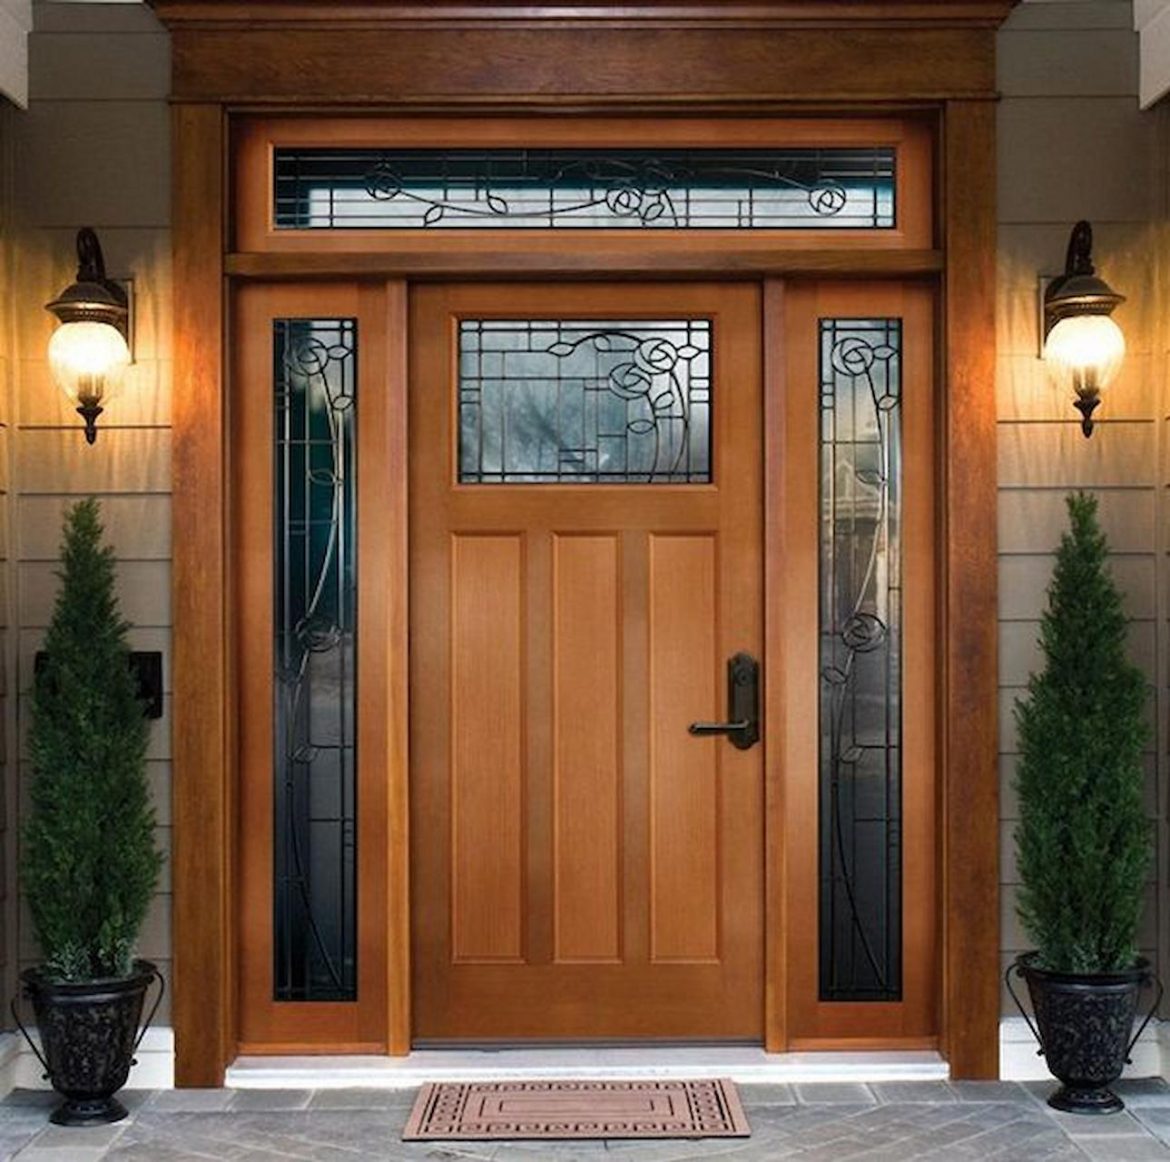 Considerations While Choosing The Right Front Door For Your Home